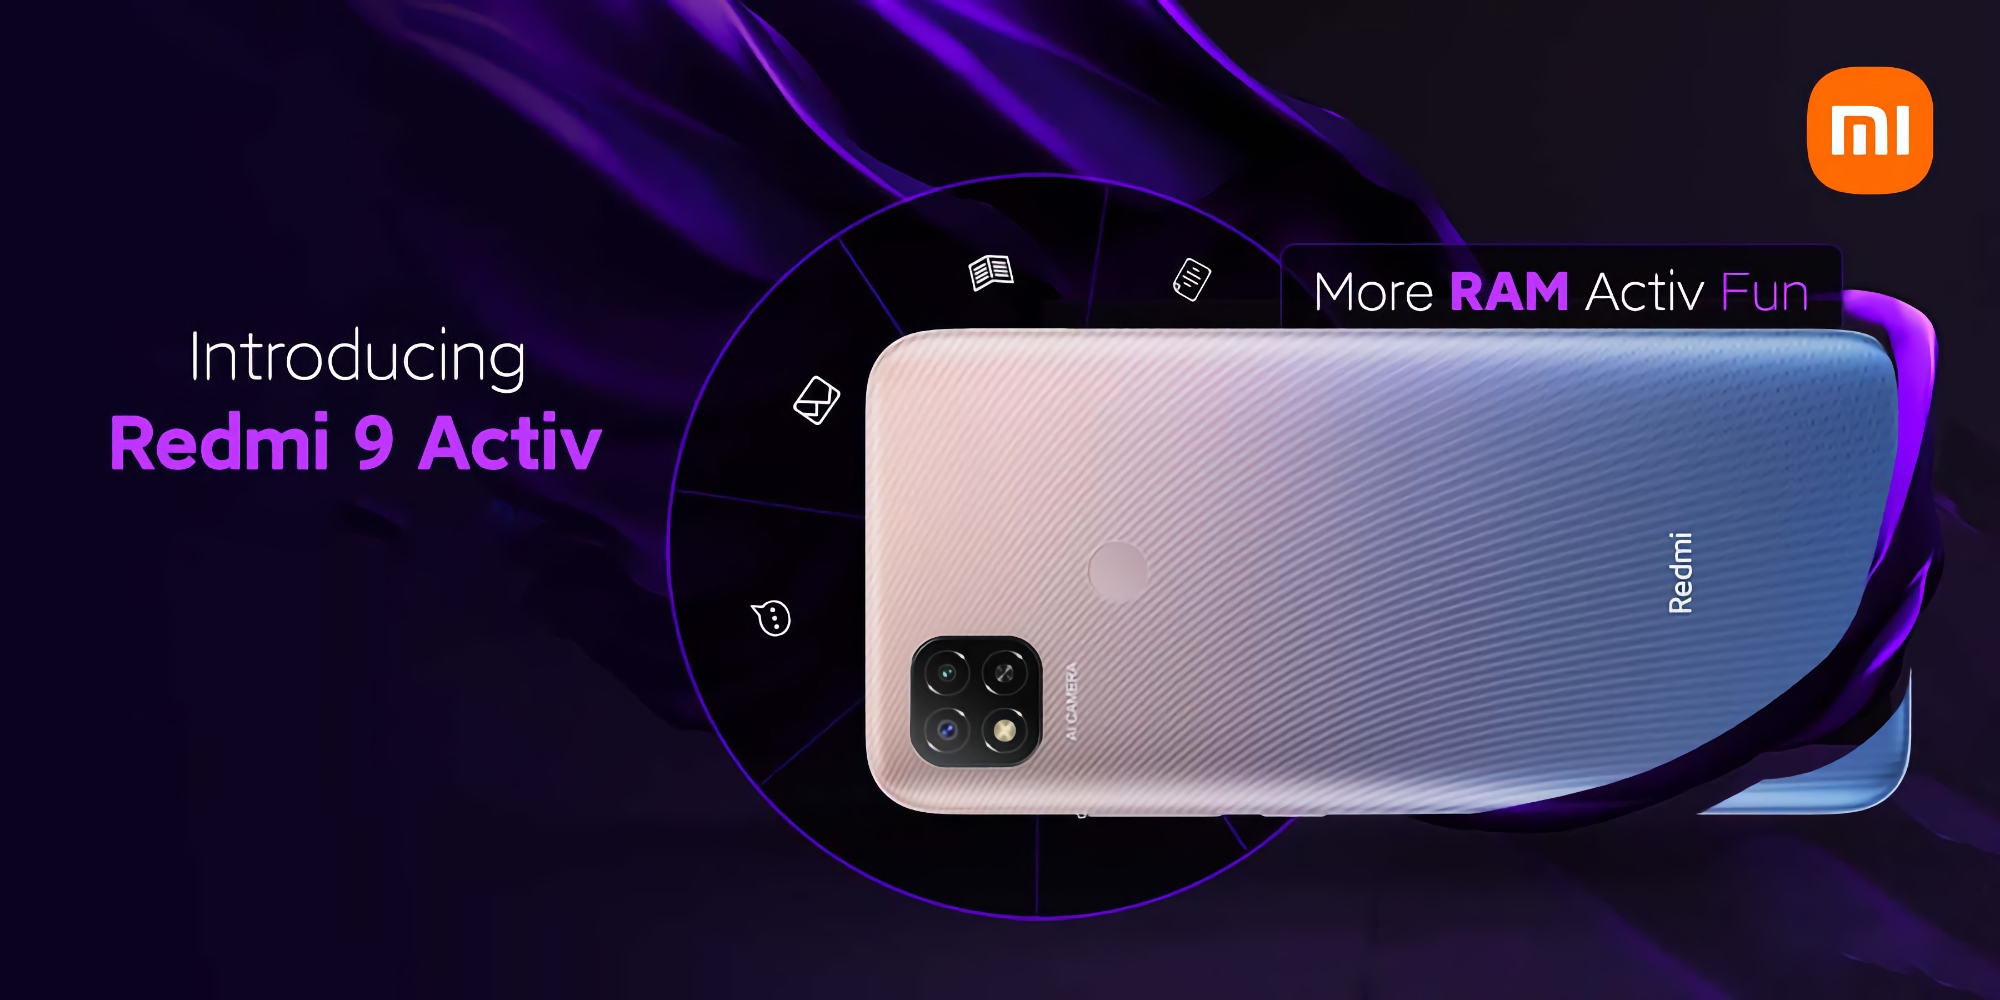 Xiaomi unveiled Redmi 9 Activ with MediaTek Helio G35 chip and 5000mAh battery for $130